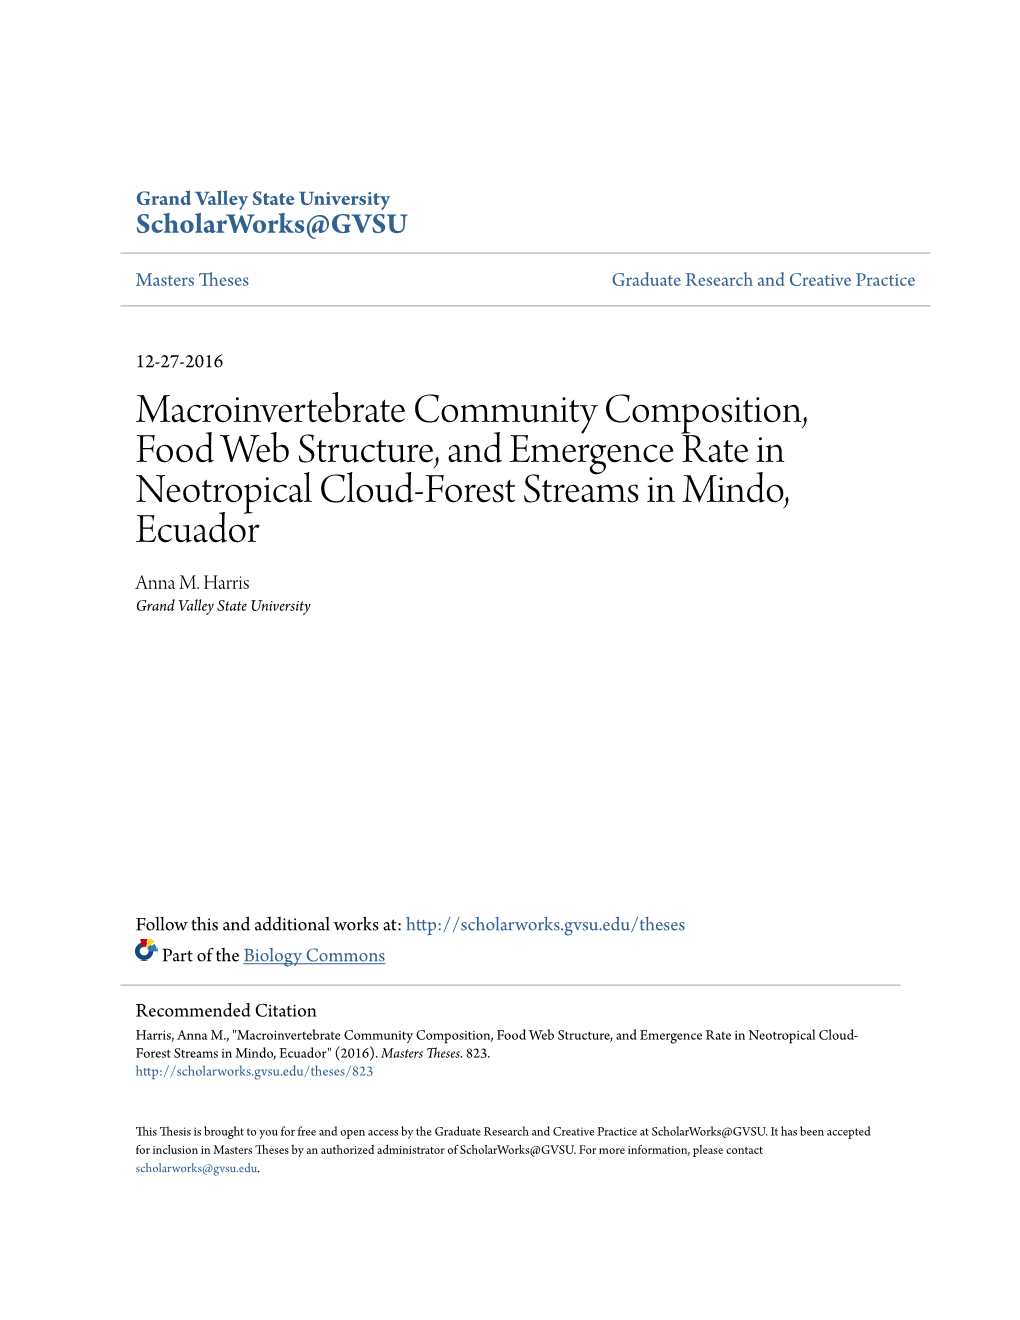 Macroinvertebrate Community Composition, Food Web Structure, and Emergence Rate in Neotropical Cloud-Forest Streams in Mindo, Ecuador Anna M